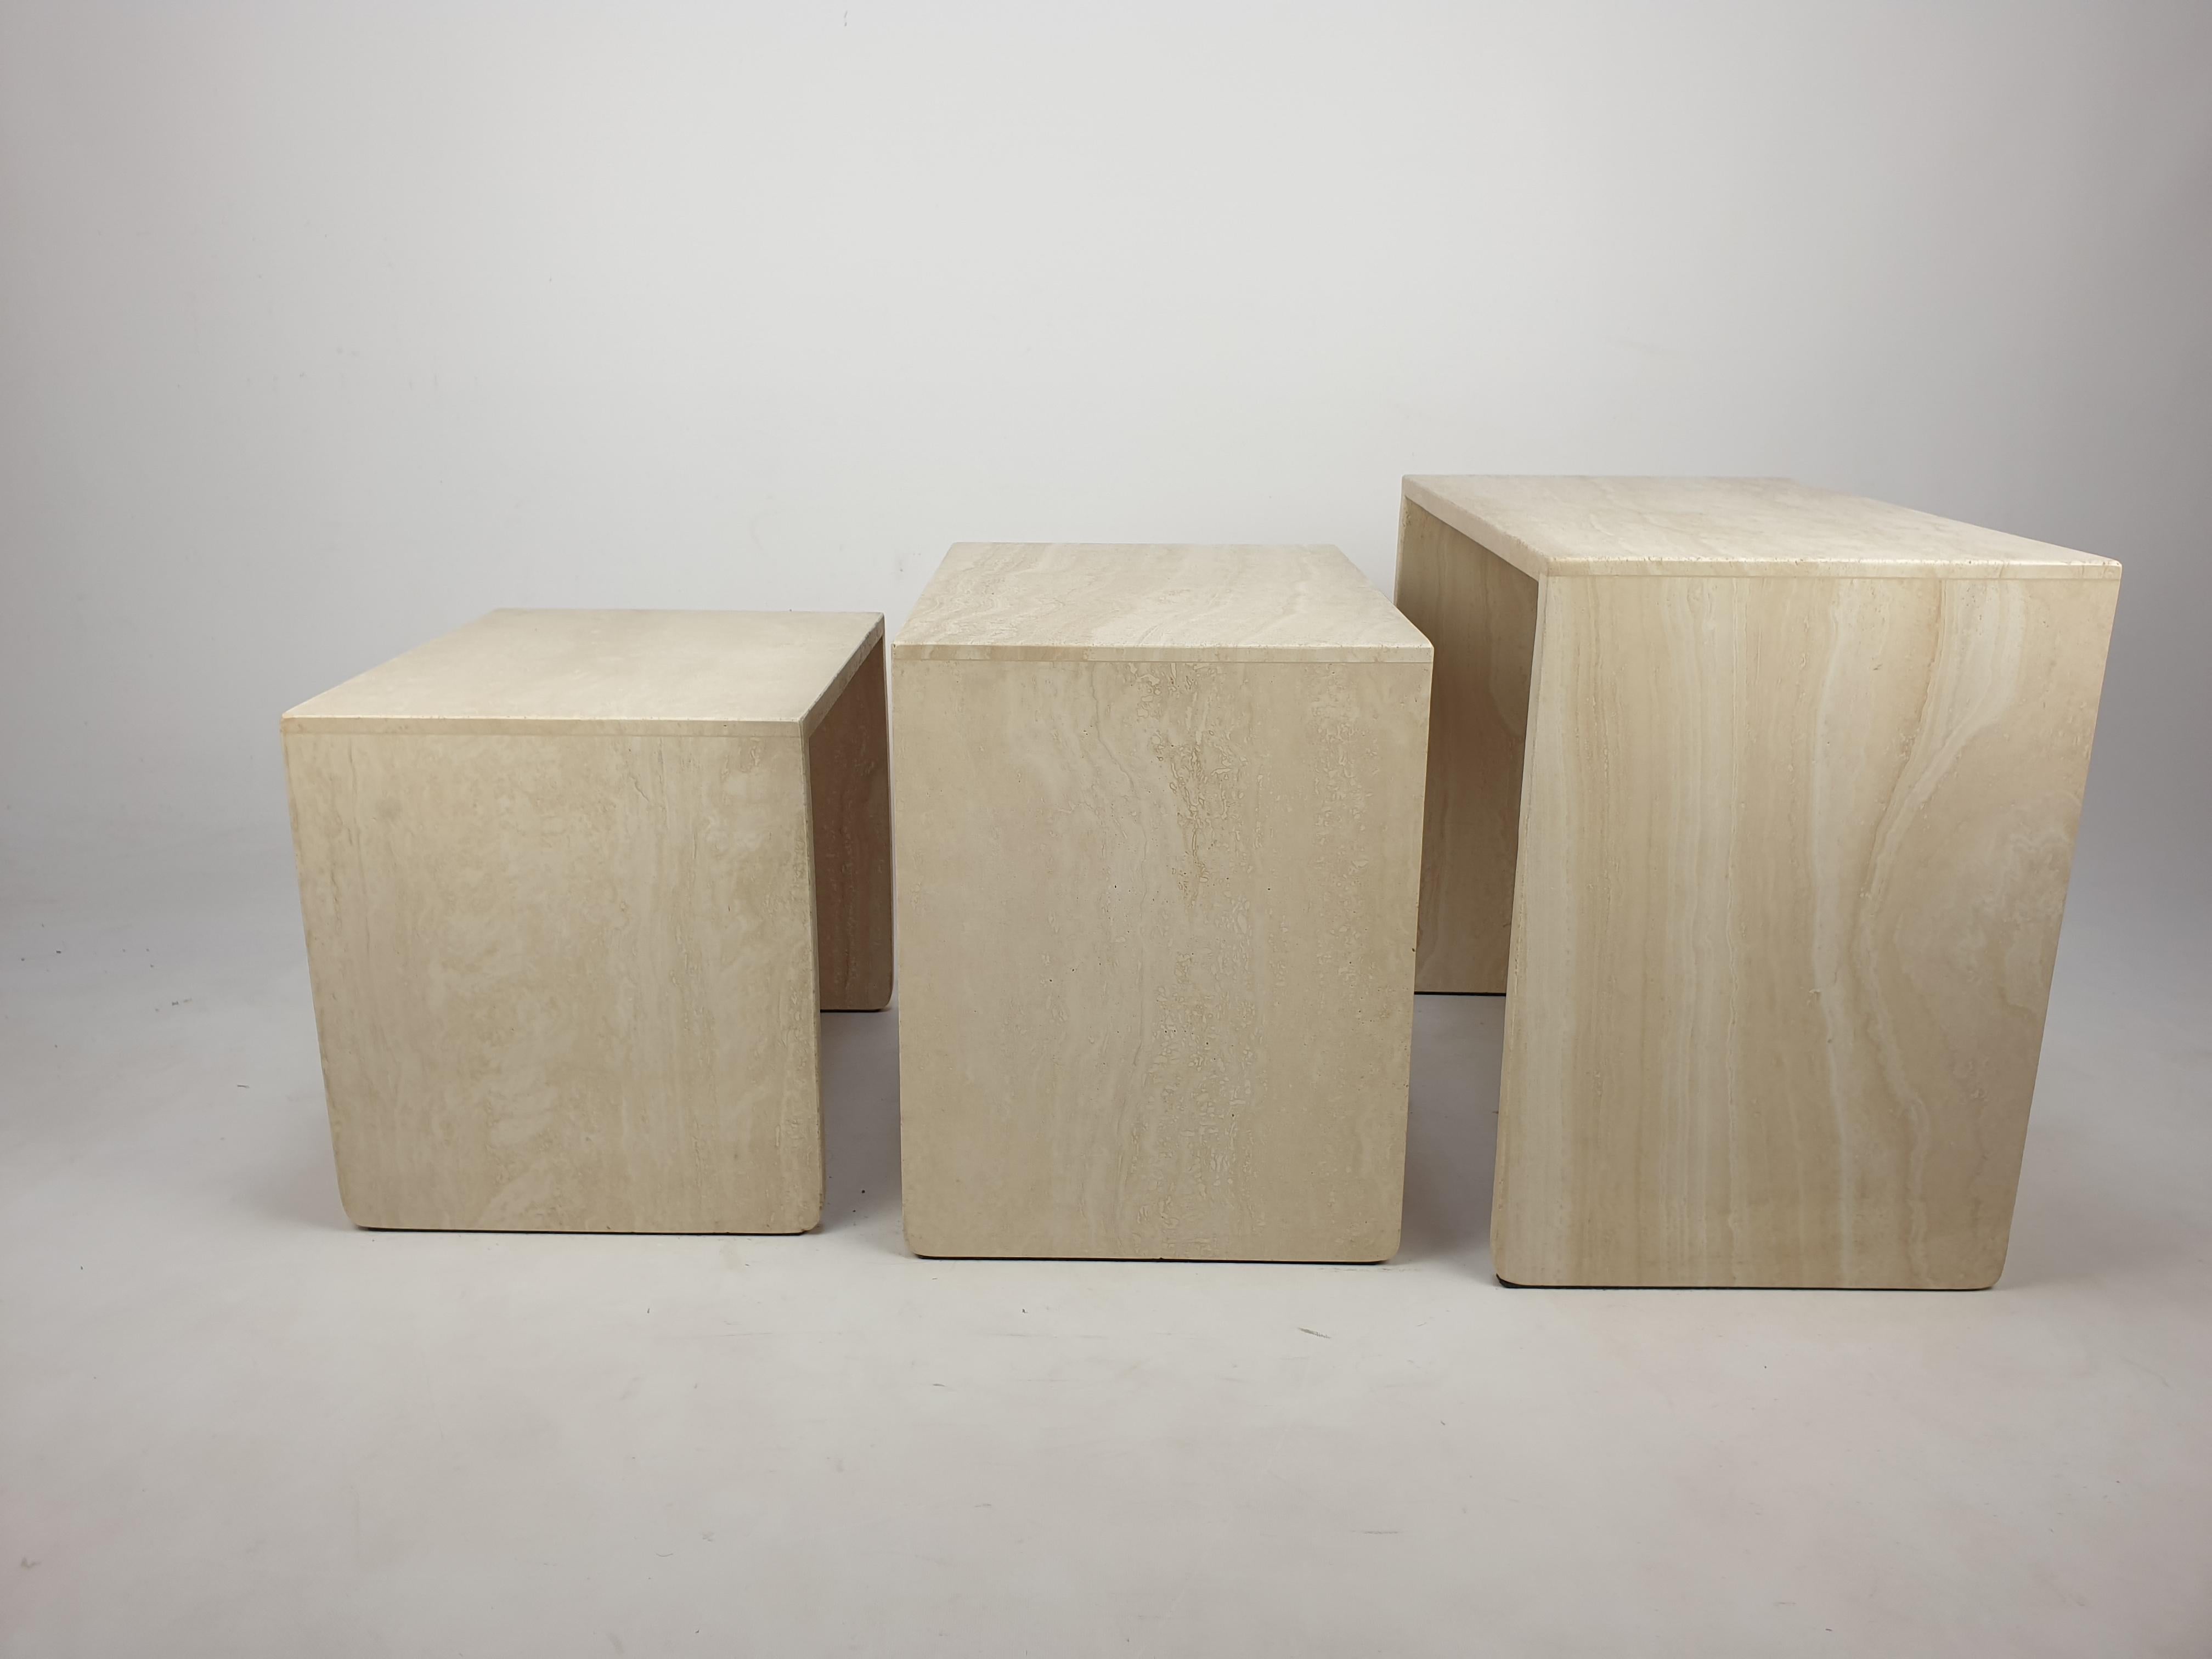 Very nice set of 3 Italian coffee tables, handcrafted out of travertine. The tables have all a different size so they fit in each other. This stunning set will make the perfect addition to any seating or living room decor for years to come.